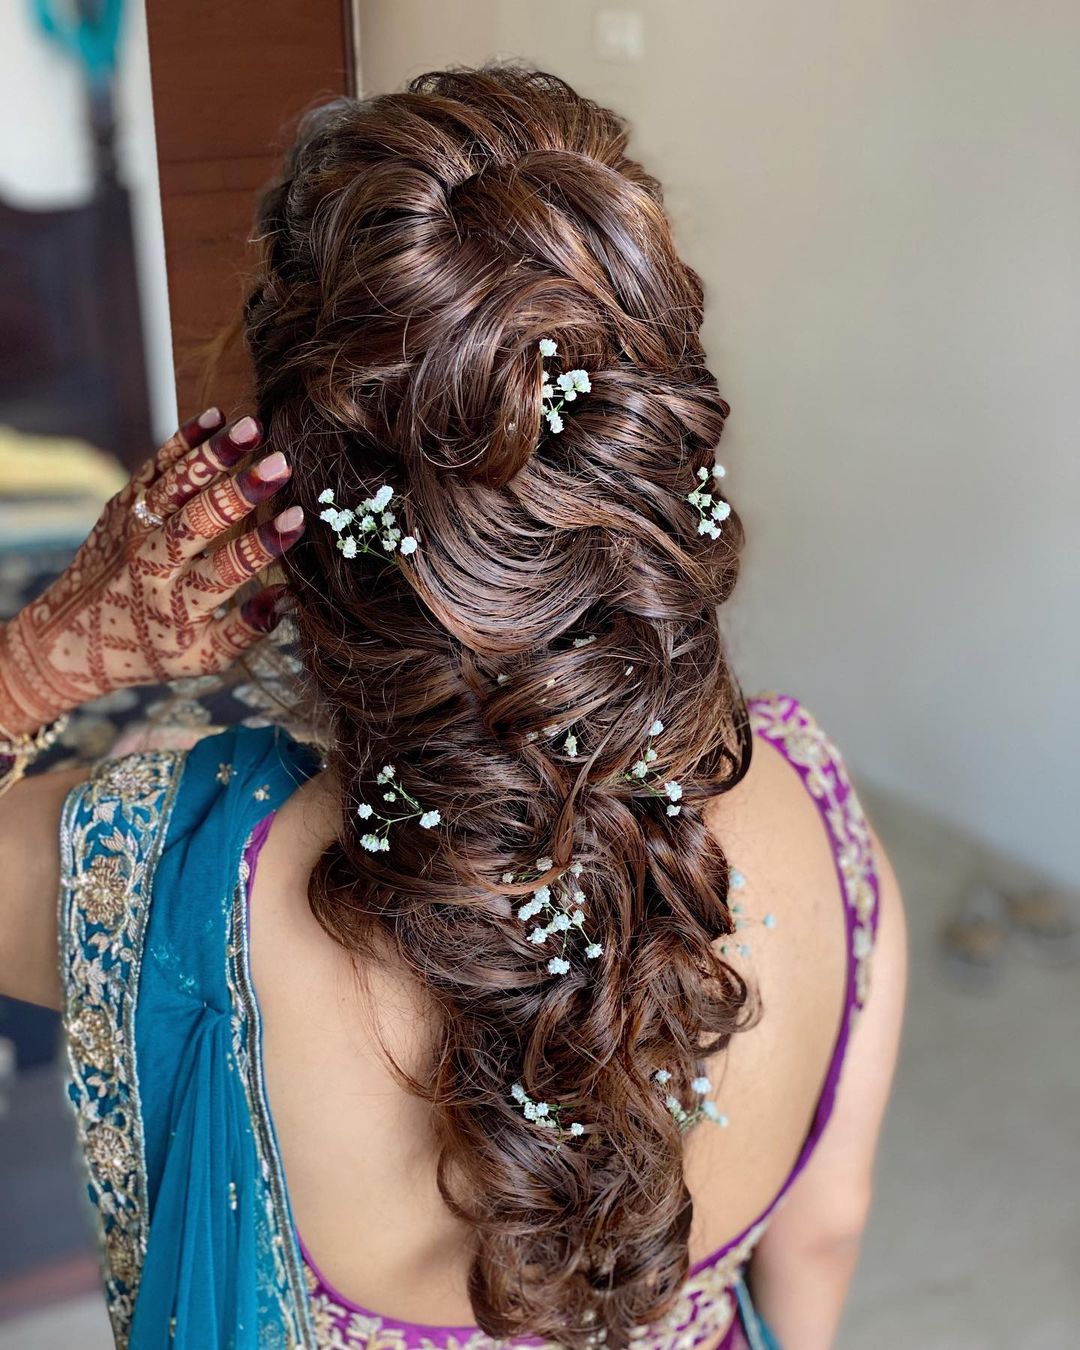 Bun Hairstyle For Lehenga Step By Step - Easy Hairstyles But Pretty -  Wedding Hairstyles And Party | Bun Hairstyle For Lehenga Step By Step -  Easy Hairstyles But Pretty - Wedding